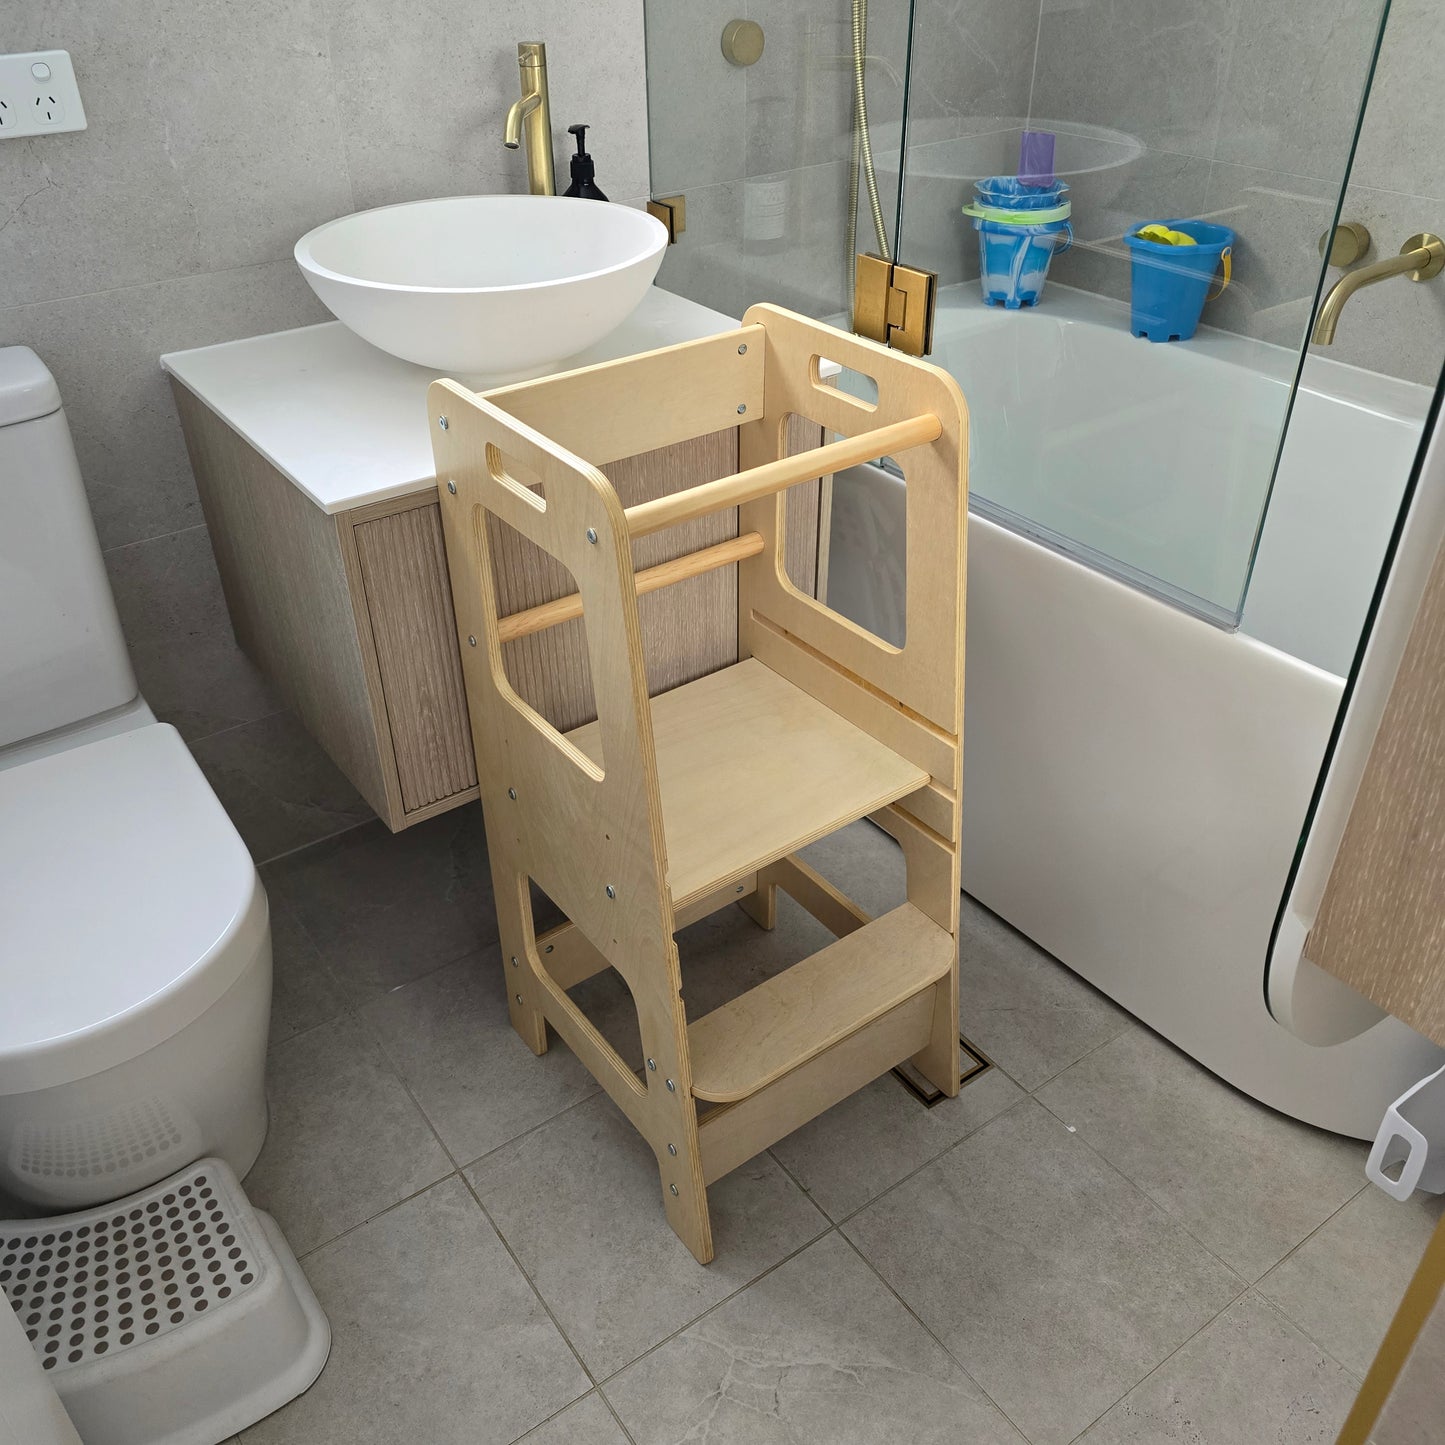 Natural Adjustable Learning Tower positioned at a bathroom sink, ready for use.